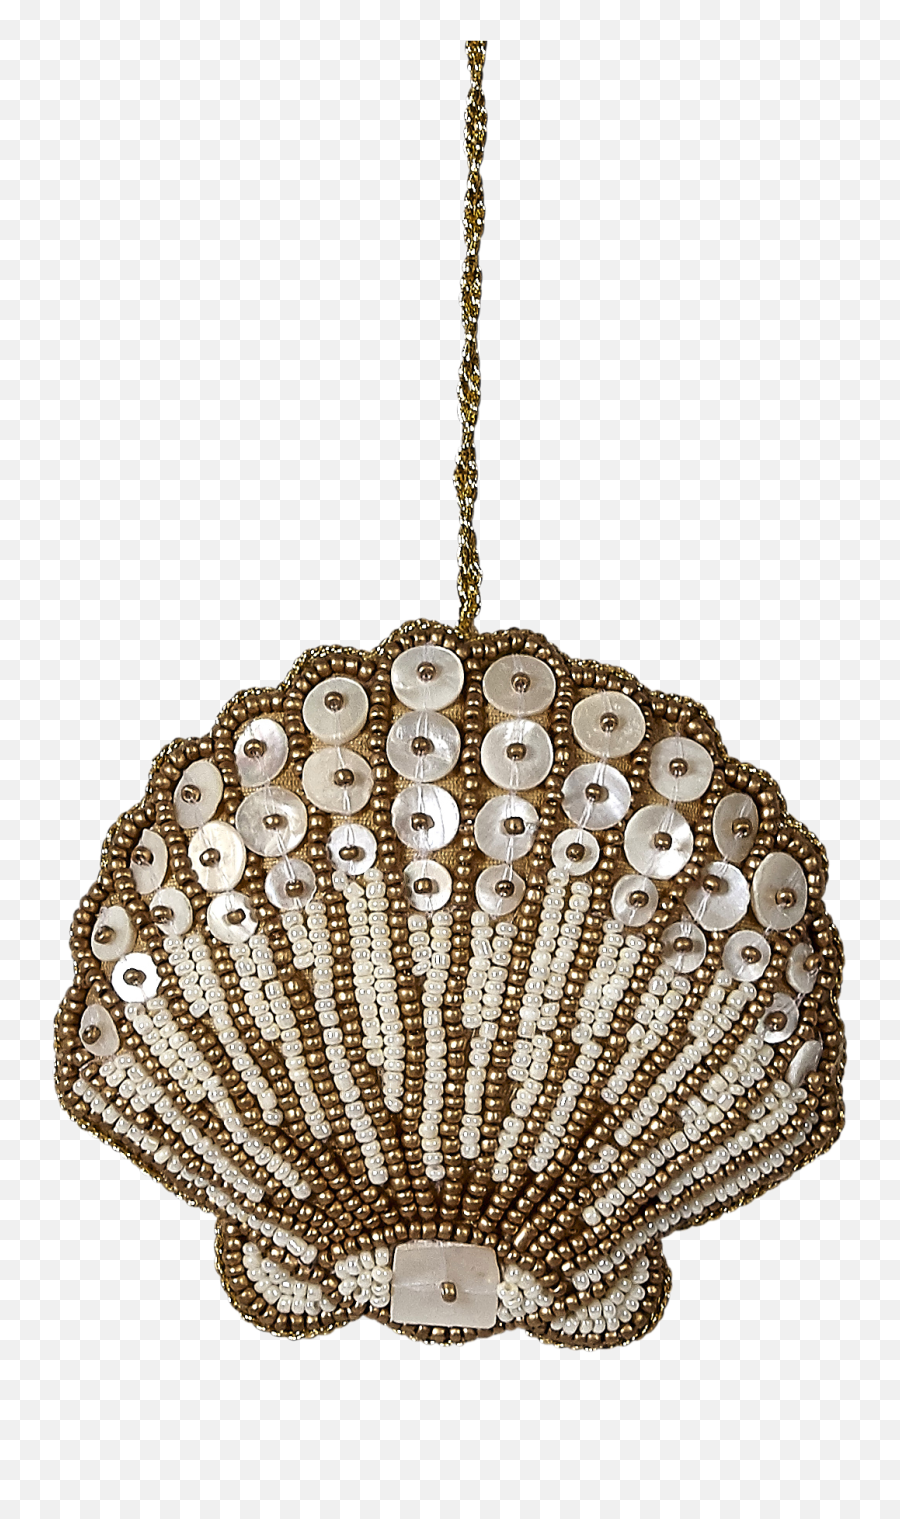 Download Hd Bead And Mother Of Pearl Ornament 4 Scallop - Ceiling Fixture Png,Scallop Png